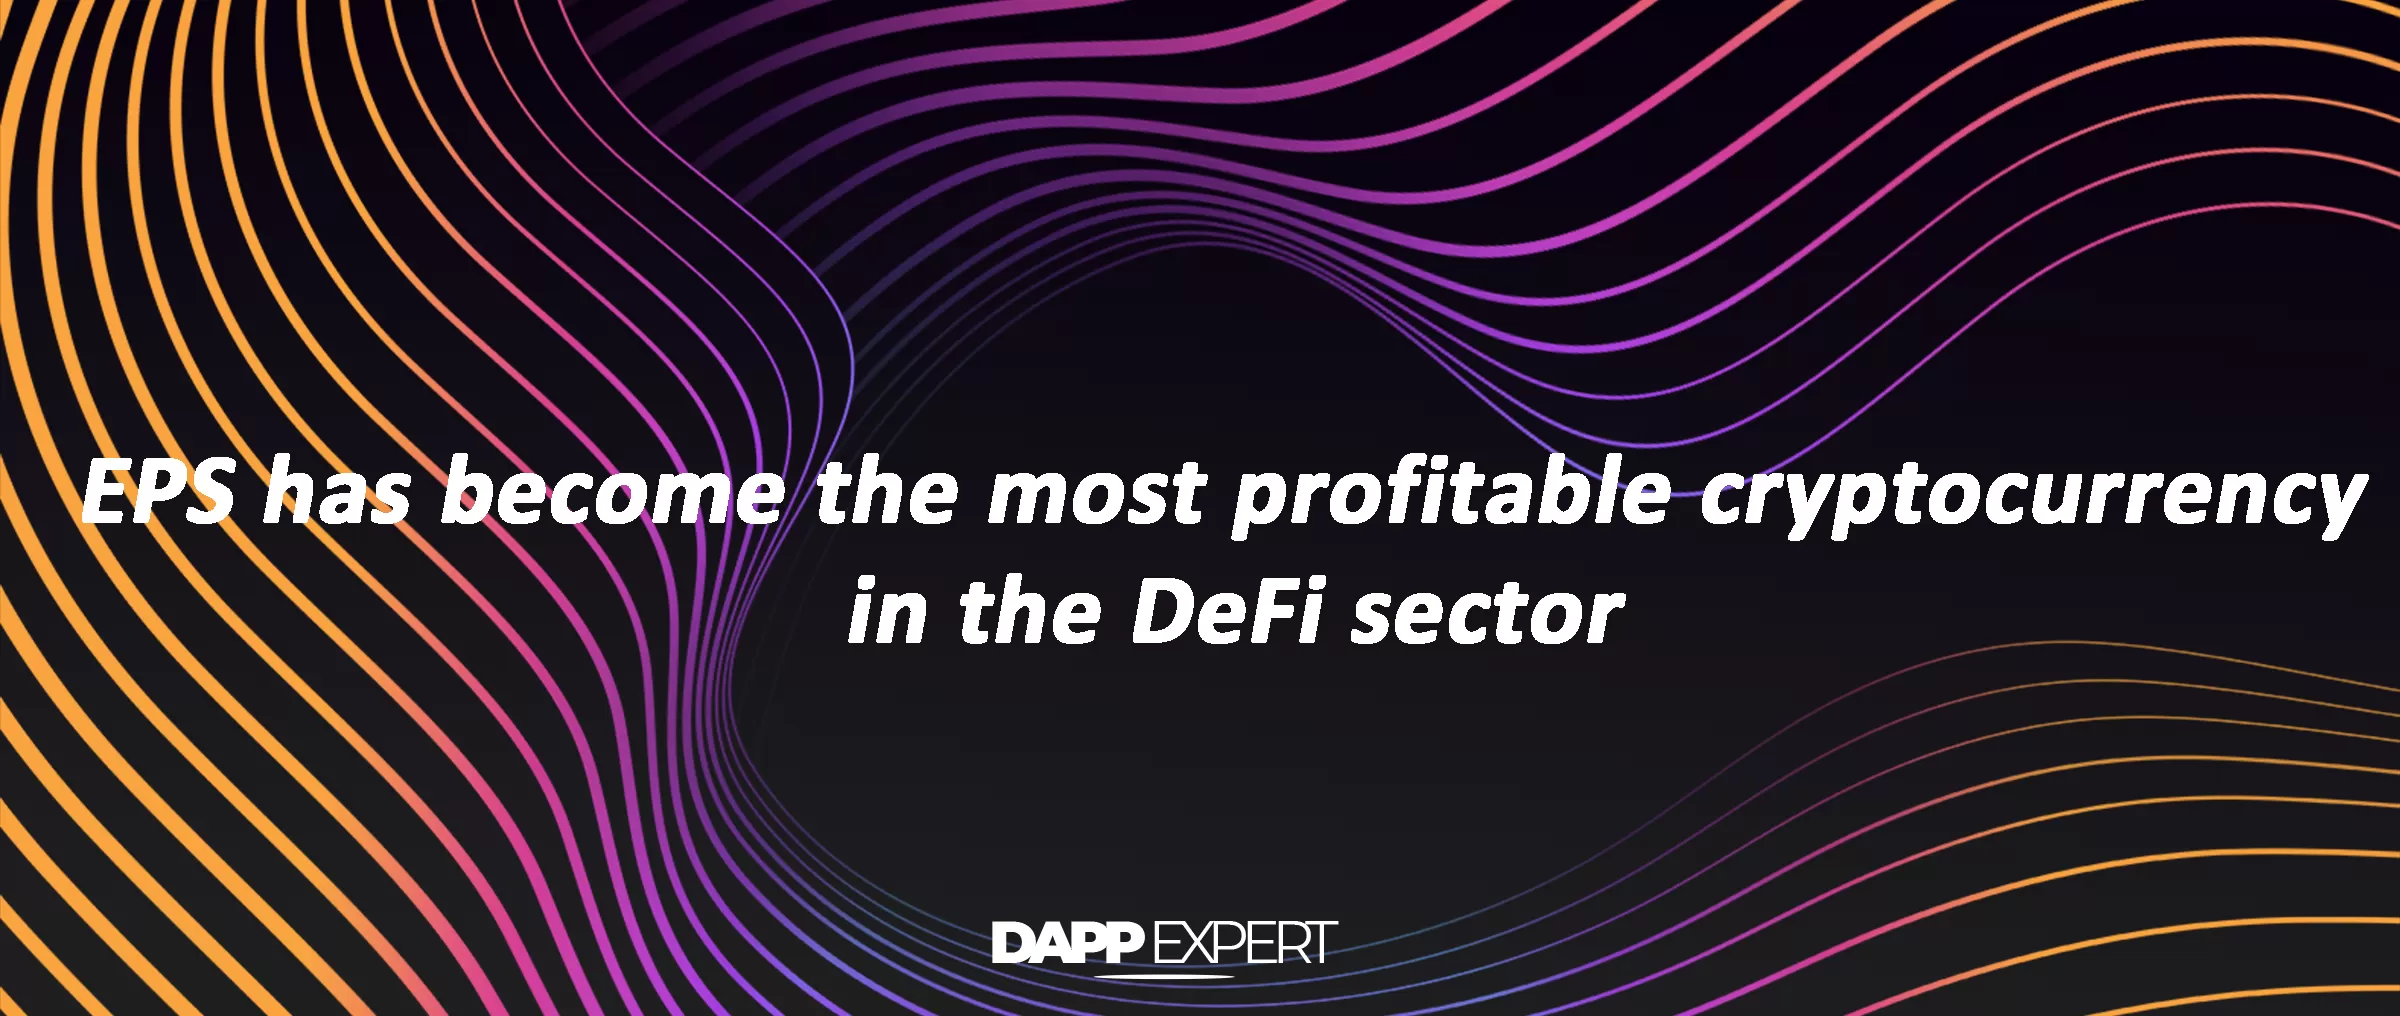 EPS has become the most profitable cryptocurrency in the DeFi sector